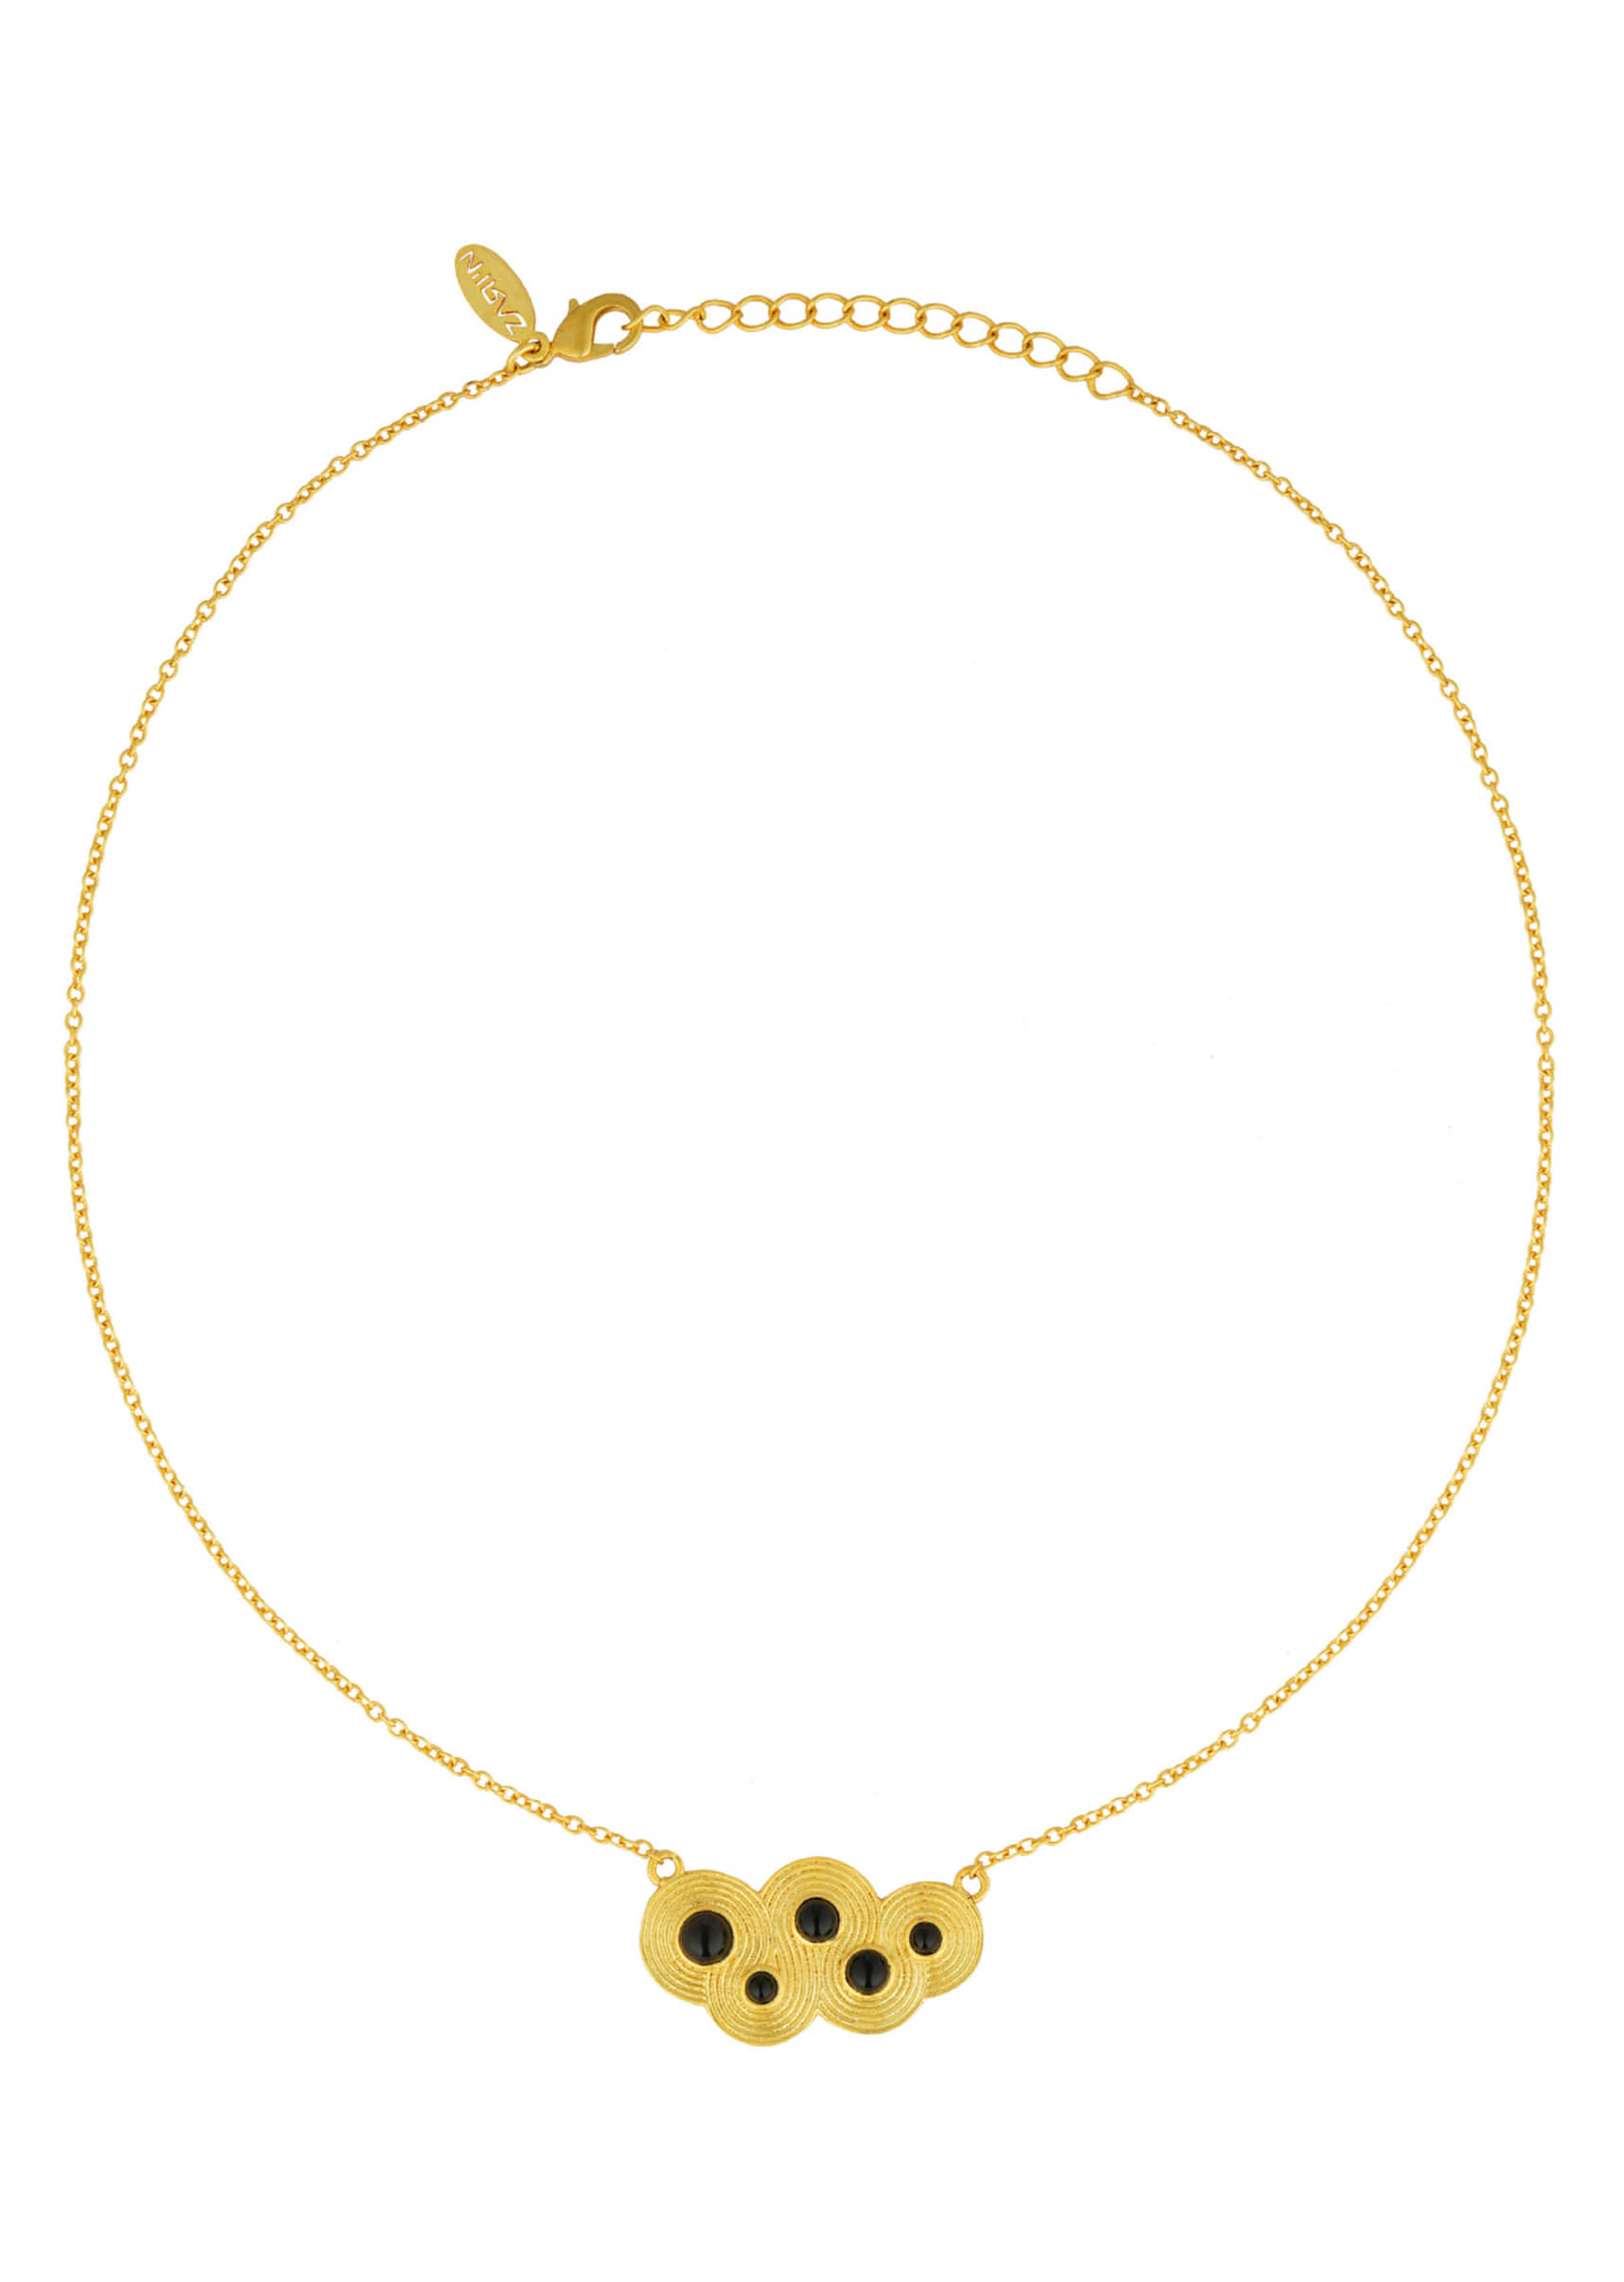 Gold Plated Necklace With A Circle Of Life Pendant Studded With Onyx Stones